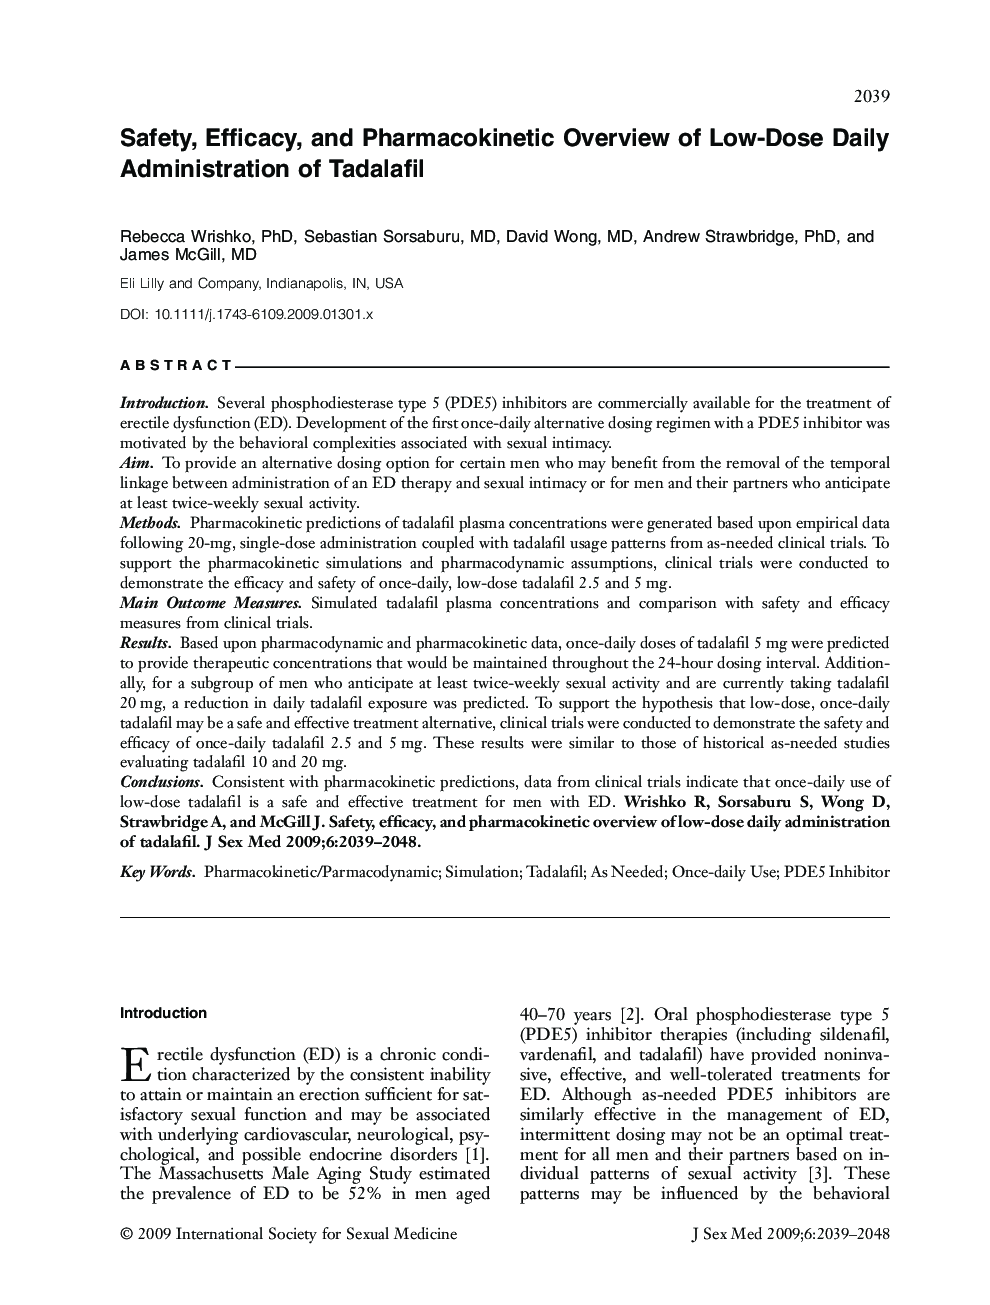 Safety, Efficacy, and Pharmacokinetic Overview of Low-Dose Daily Administration of Tadalafil